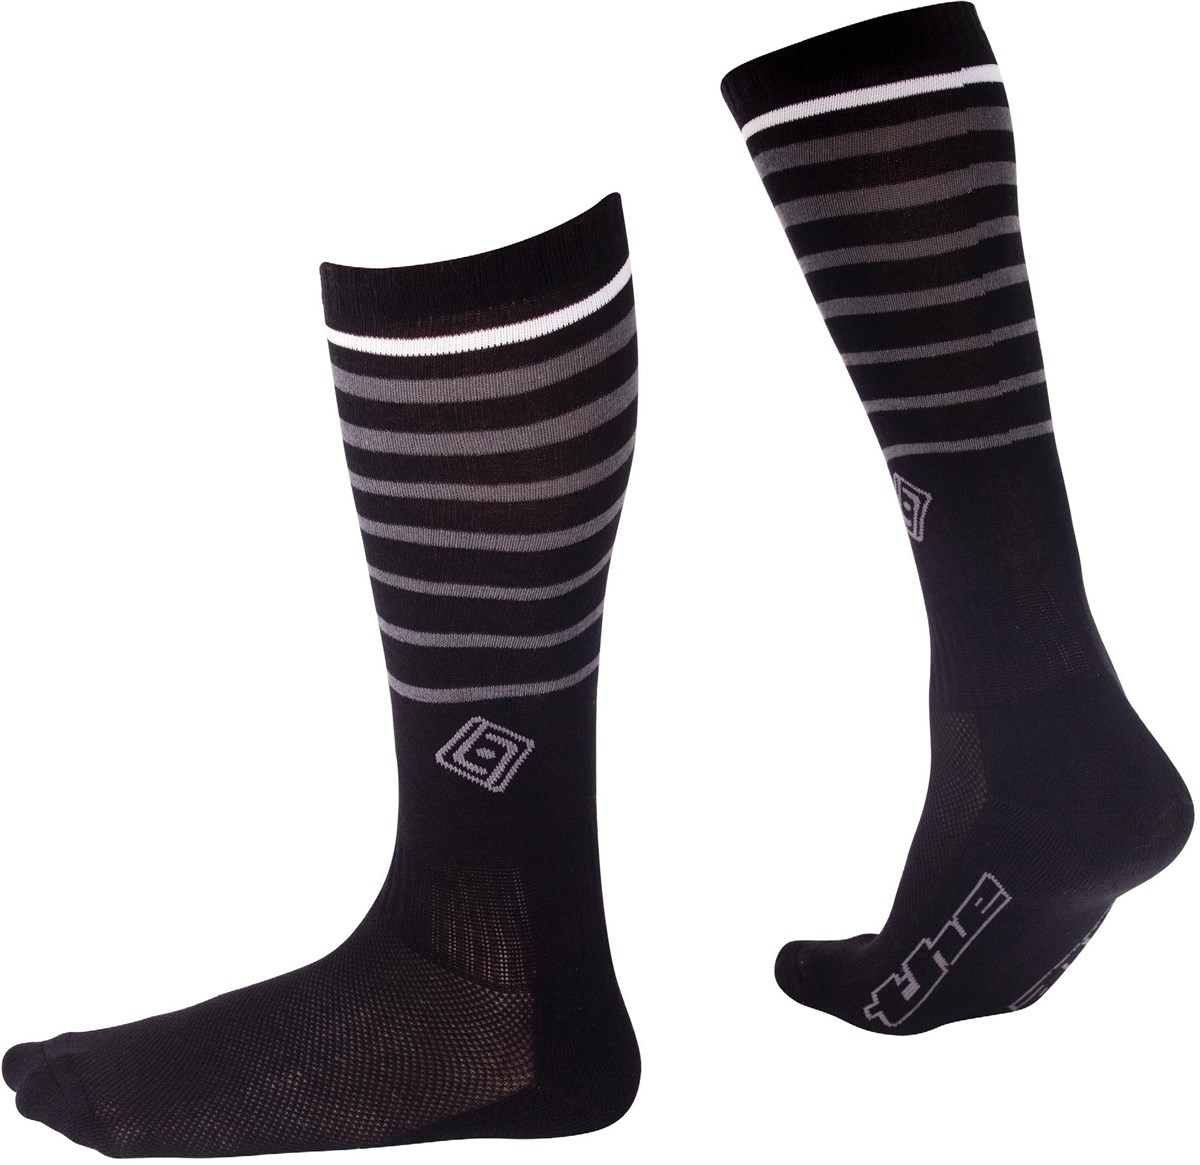 THE Industries Cosmo Socks product image